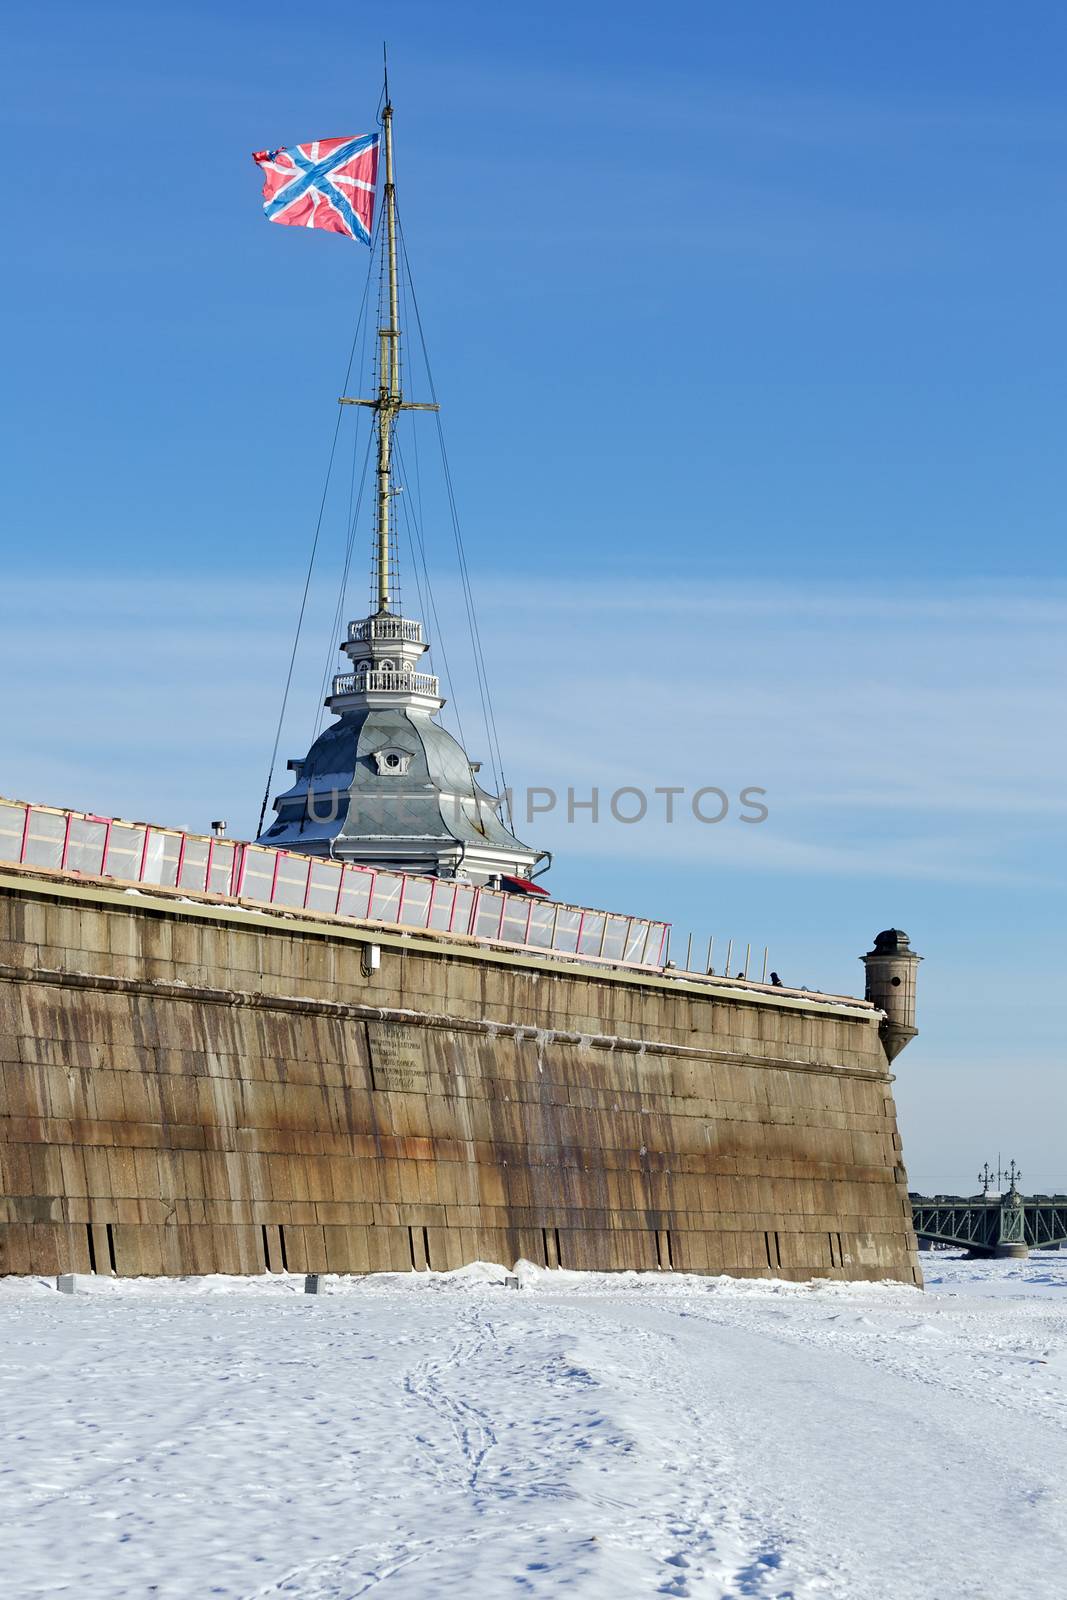 Granite Wall of Peter and Paul Fortress by Roka